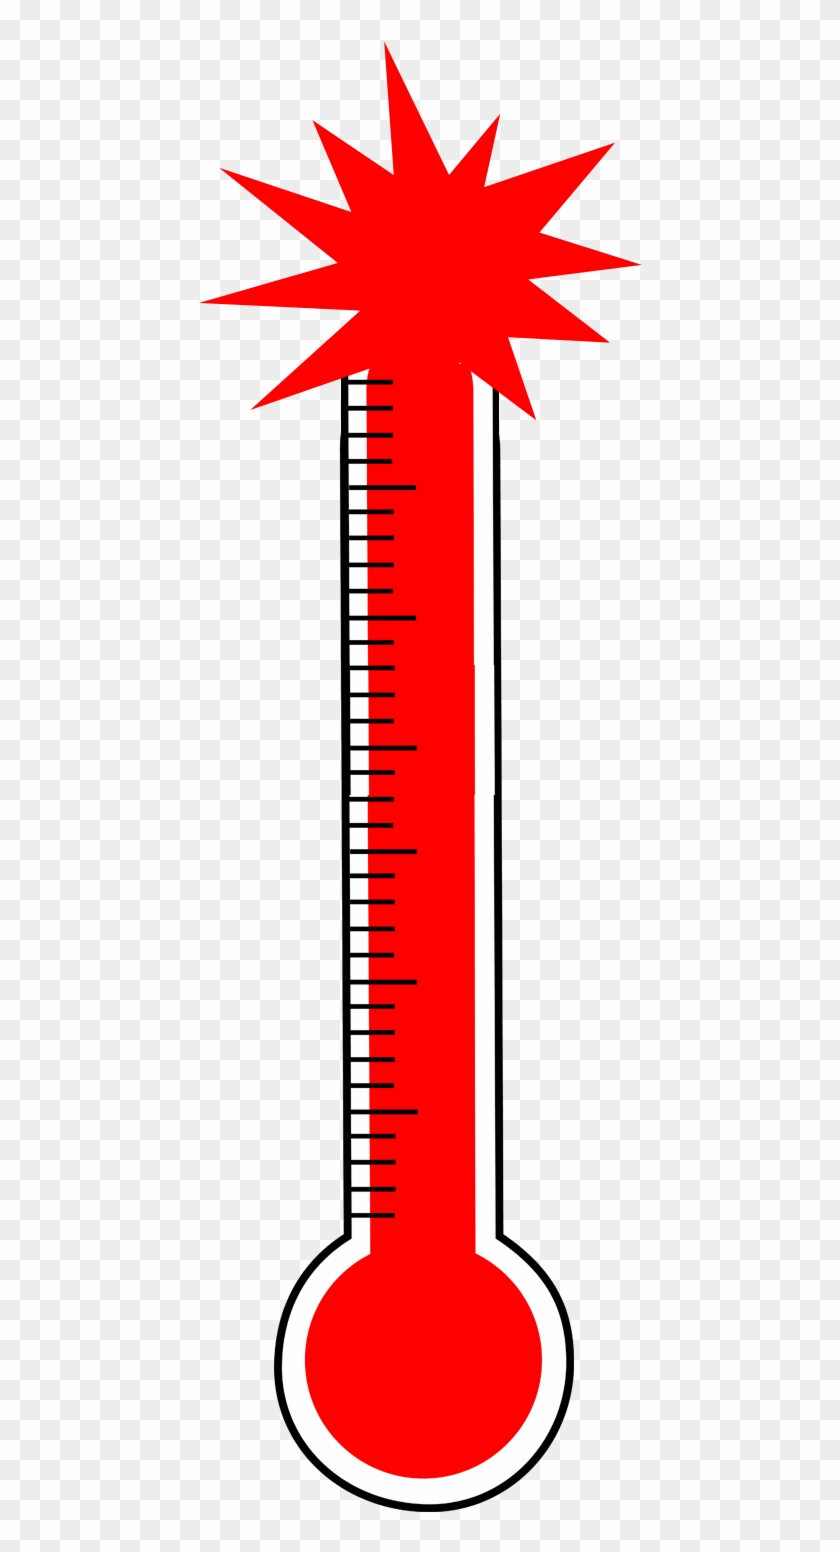 Beat The Heat Tips For Cancer Patients - High Thermometer Clip Art #72220